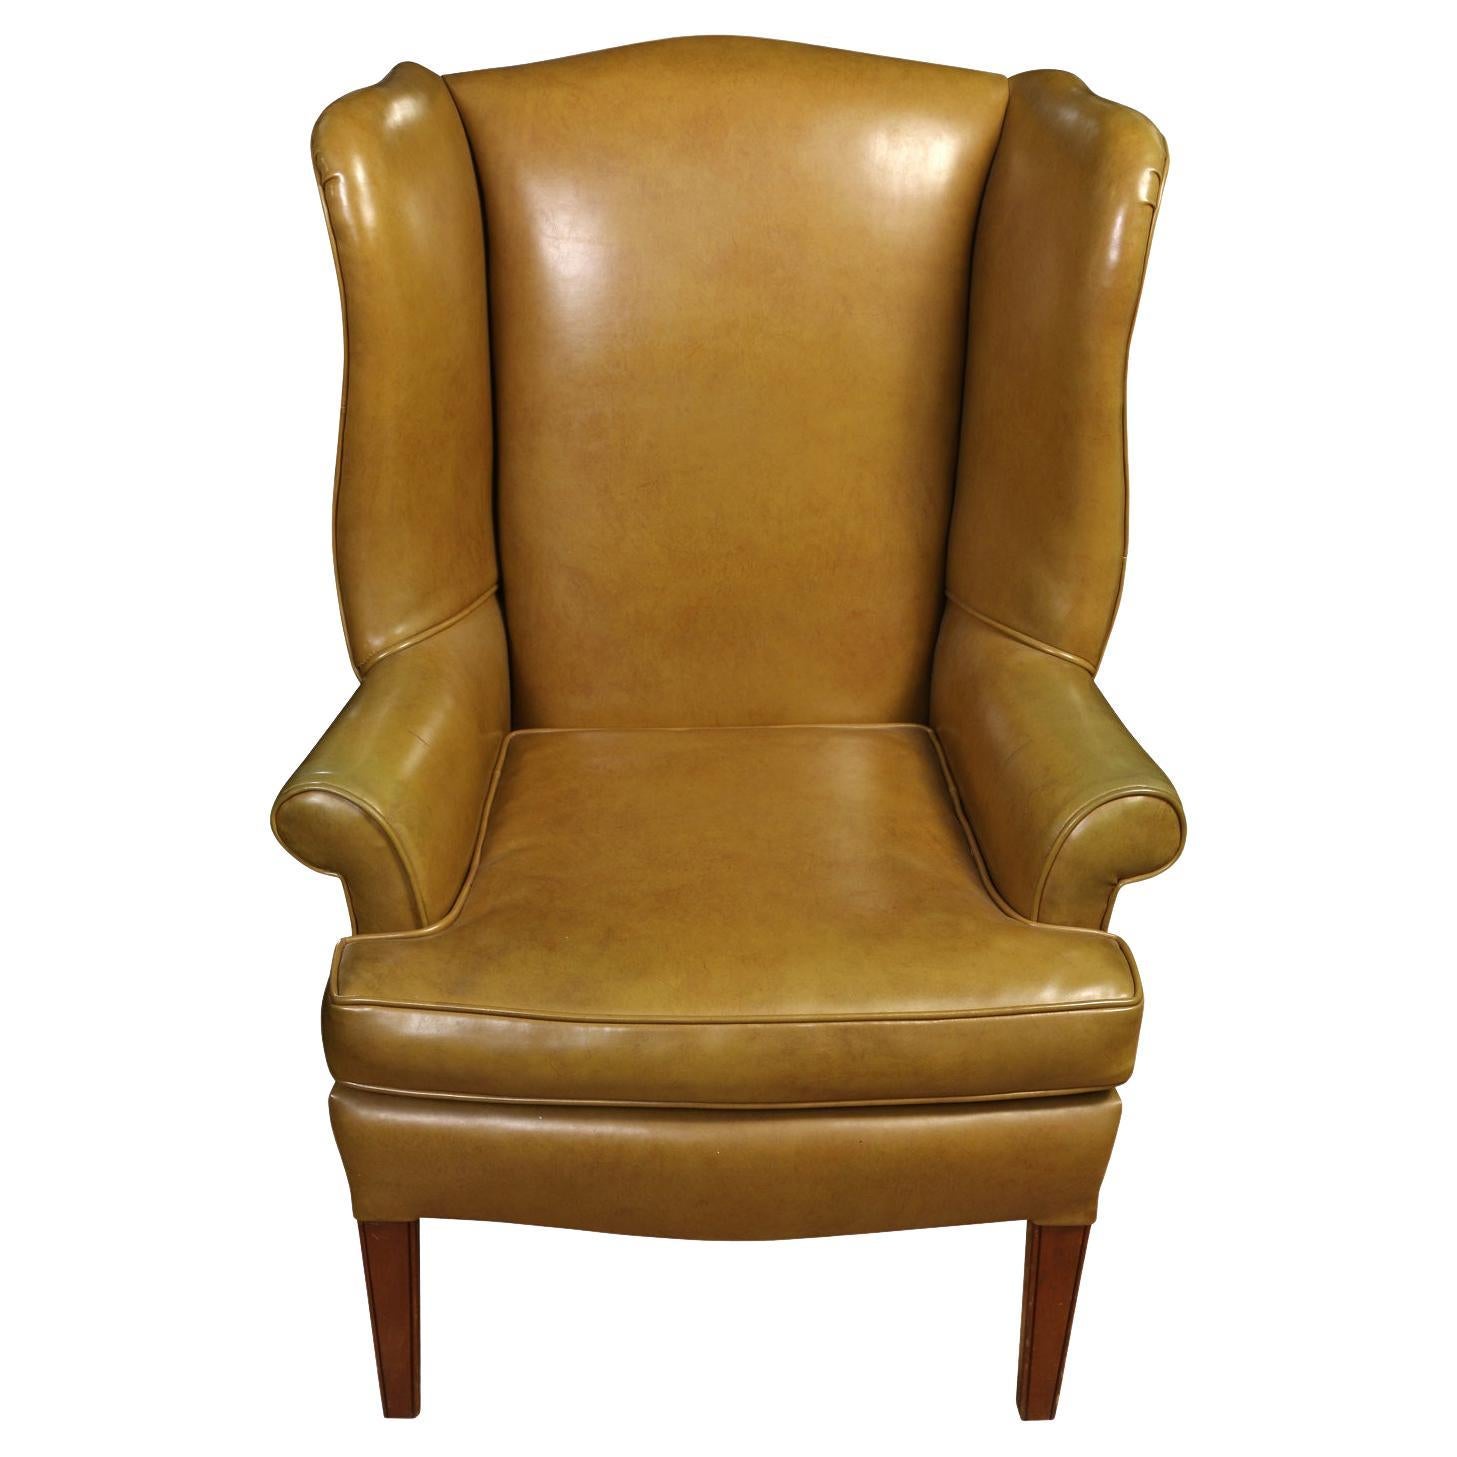 Antique Wingback Chair For Sale